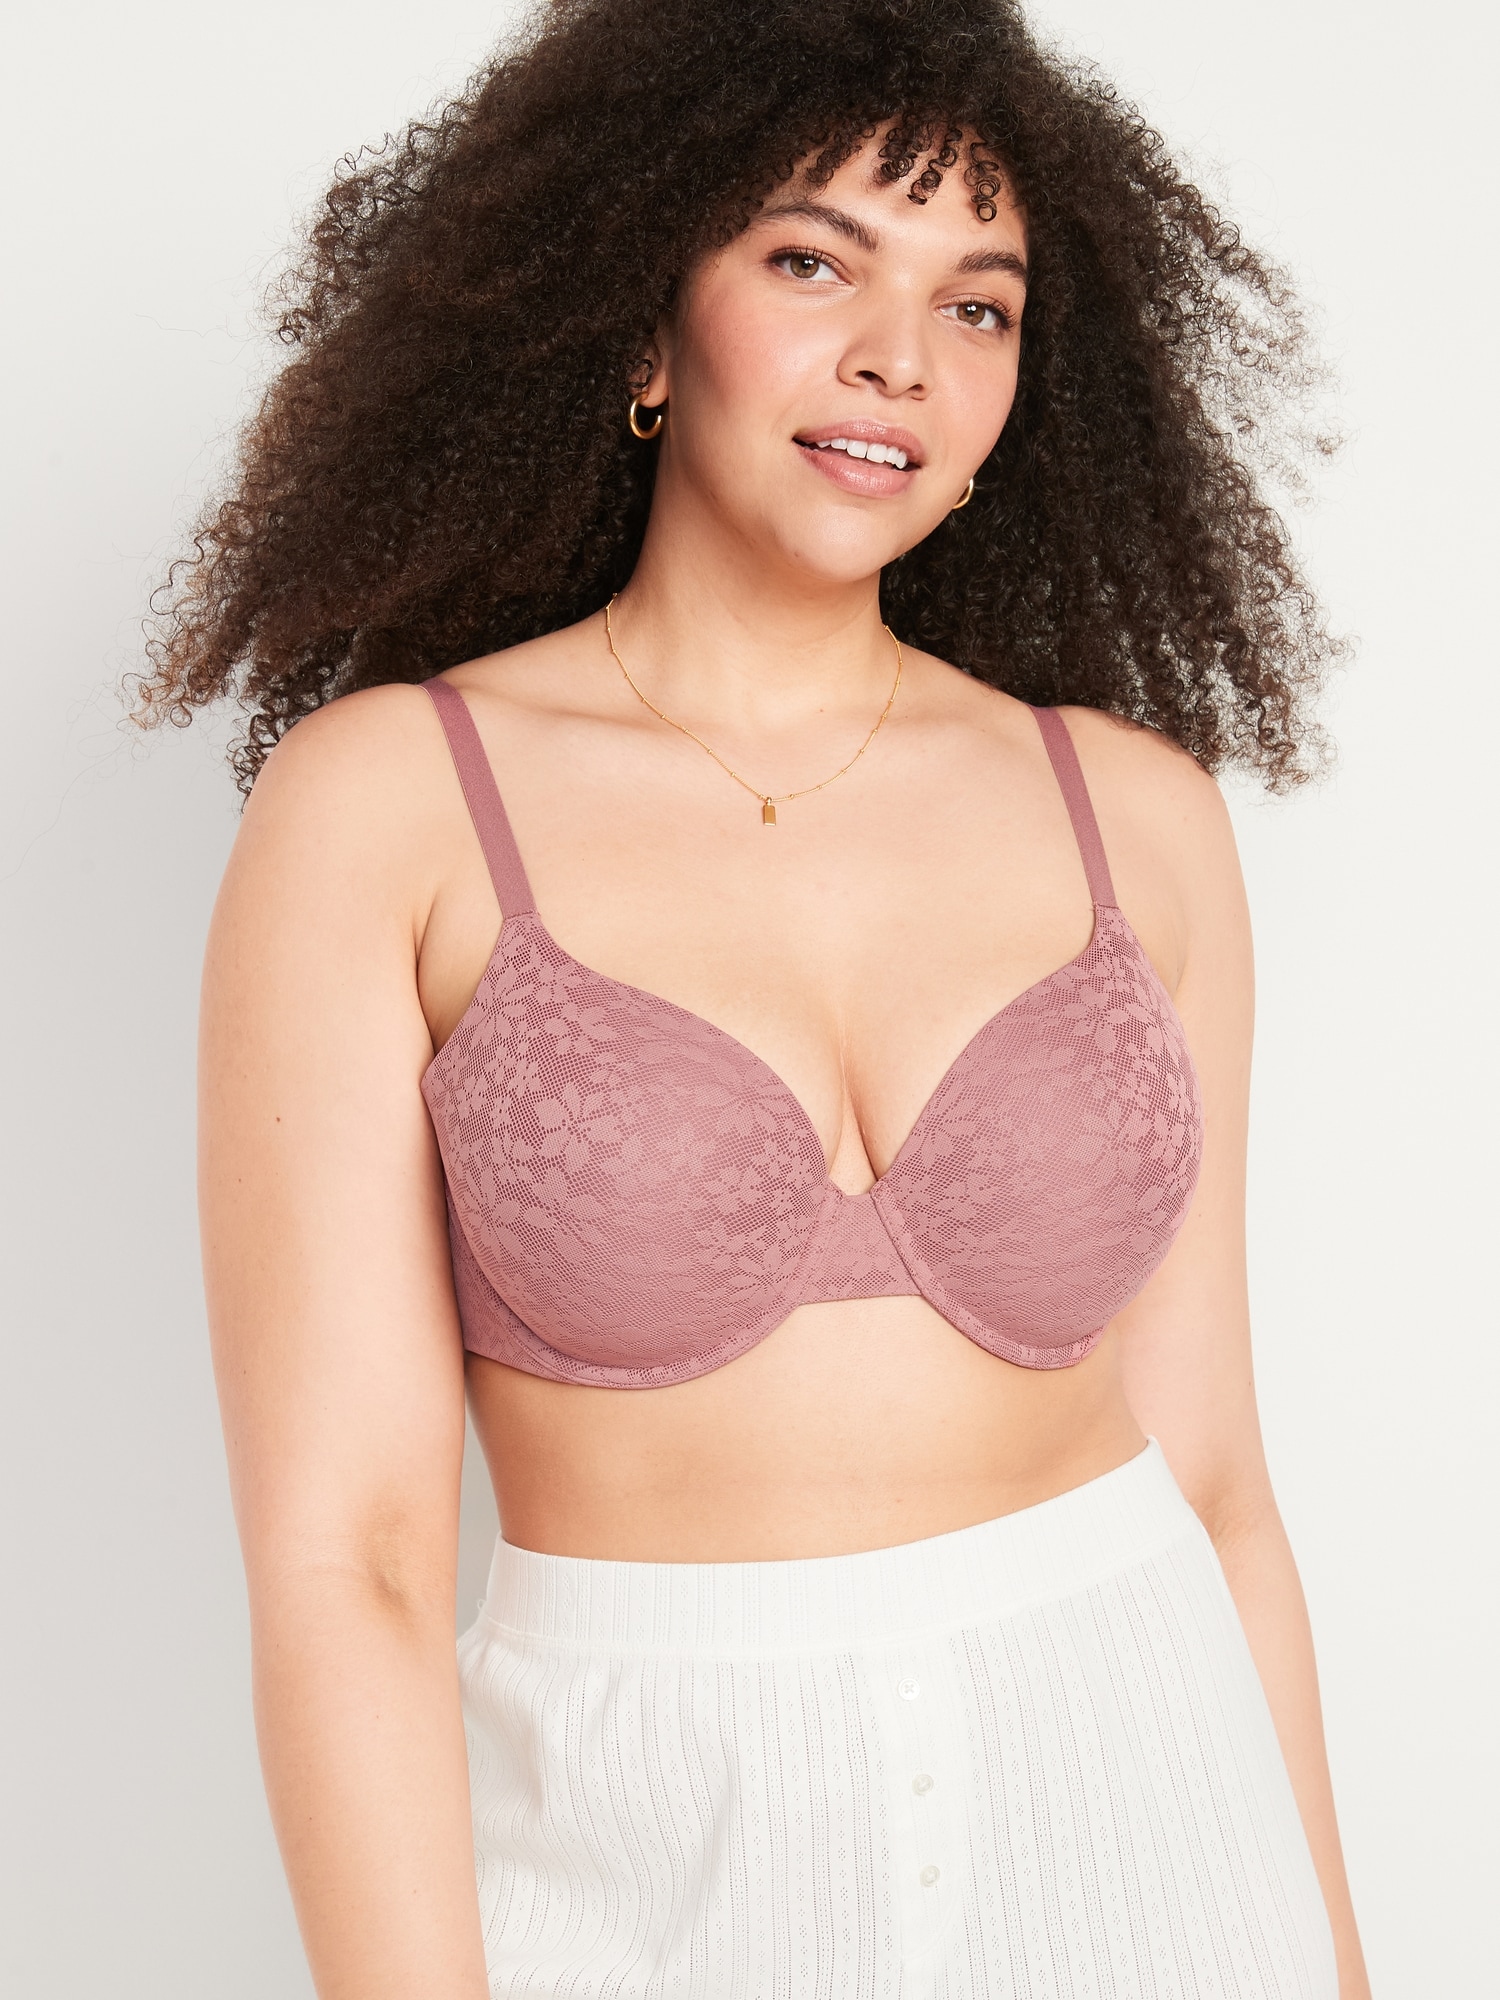 Lace Underwire Bras for Women, Full-Coverage Lace Bra with